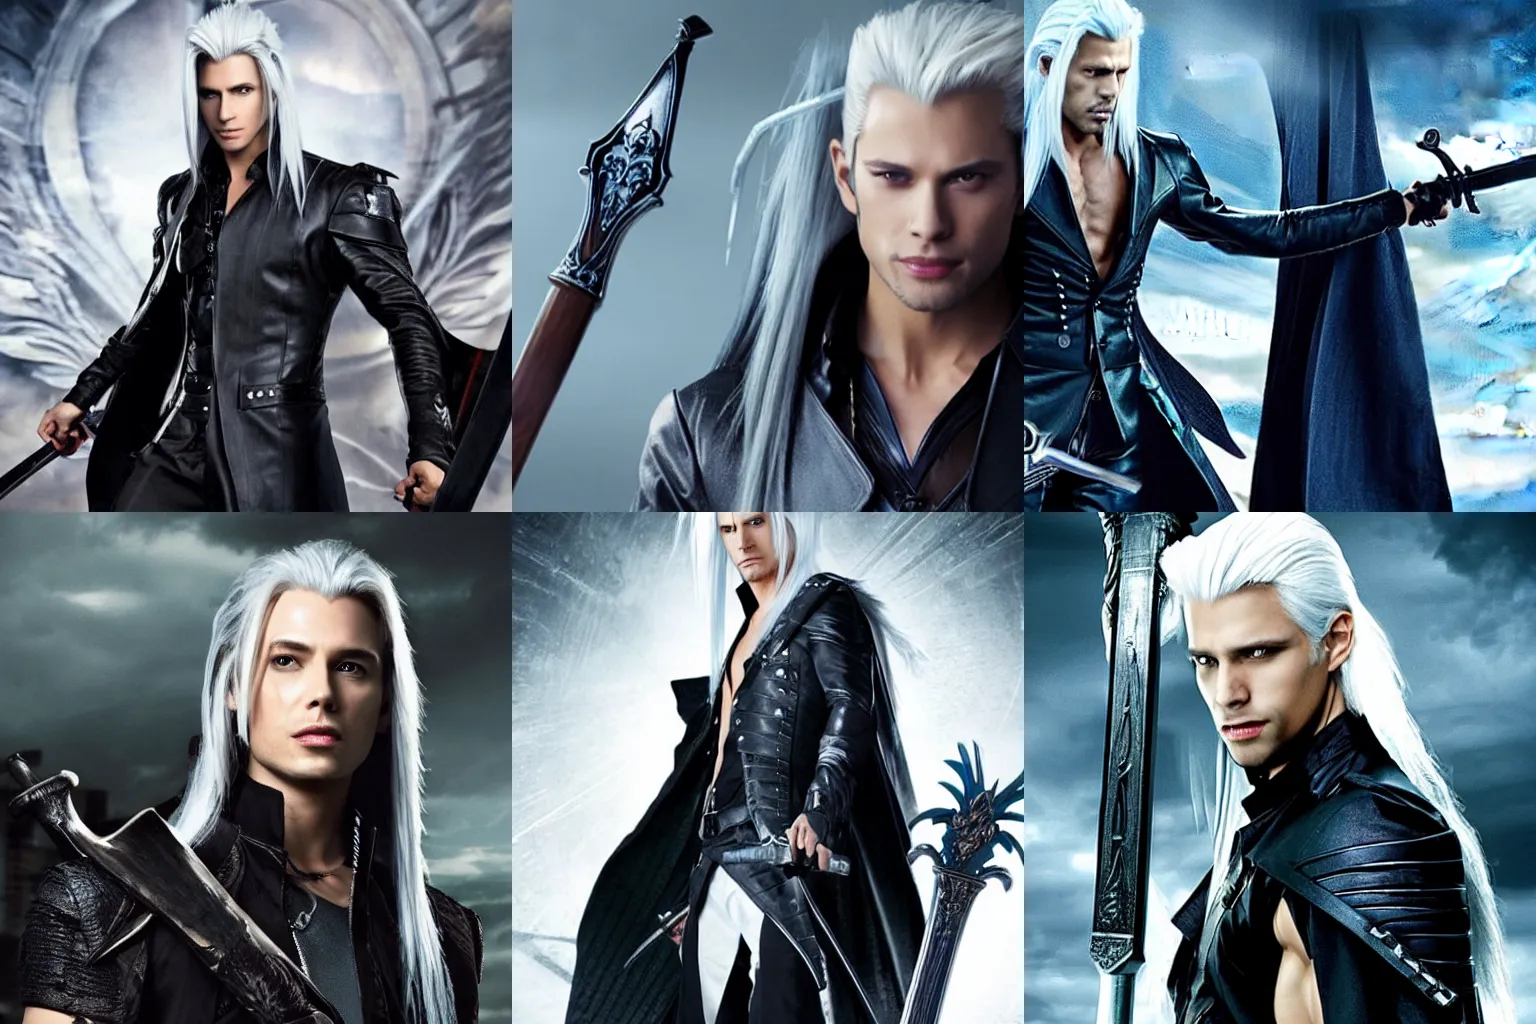 Prompt: Sephiroth as a guest character in Shadowhunters, TV